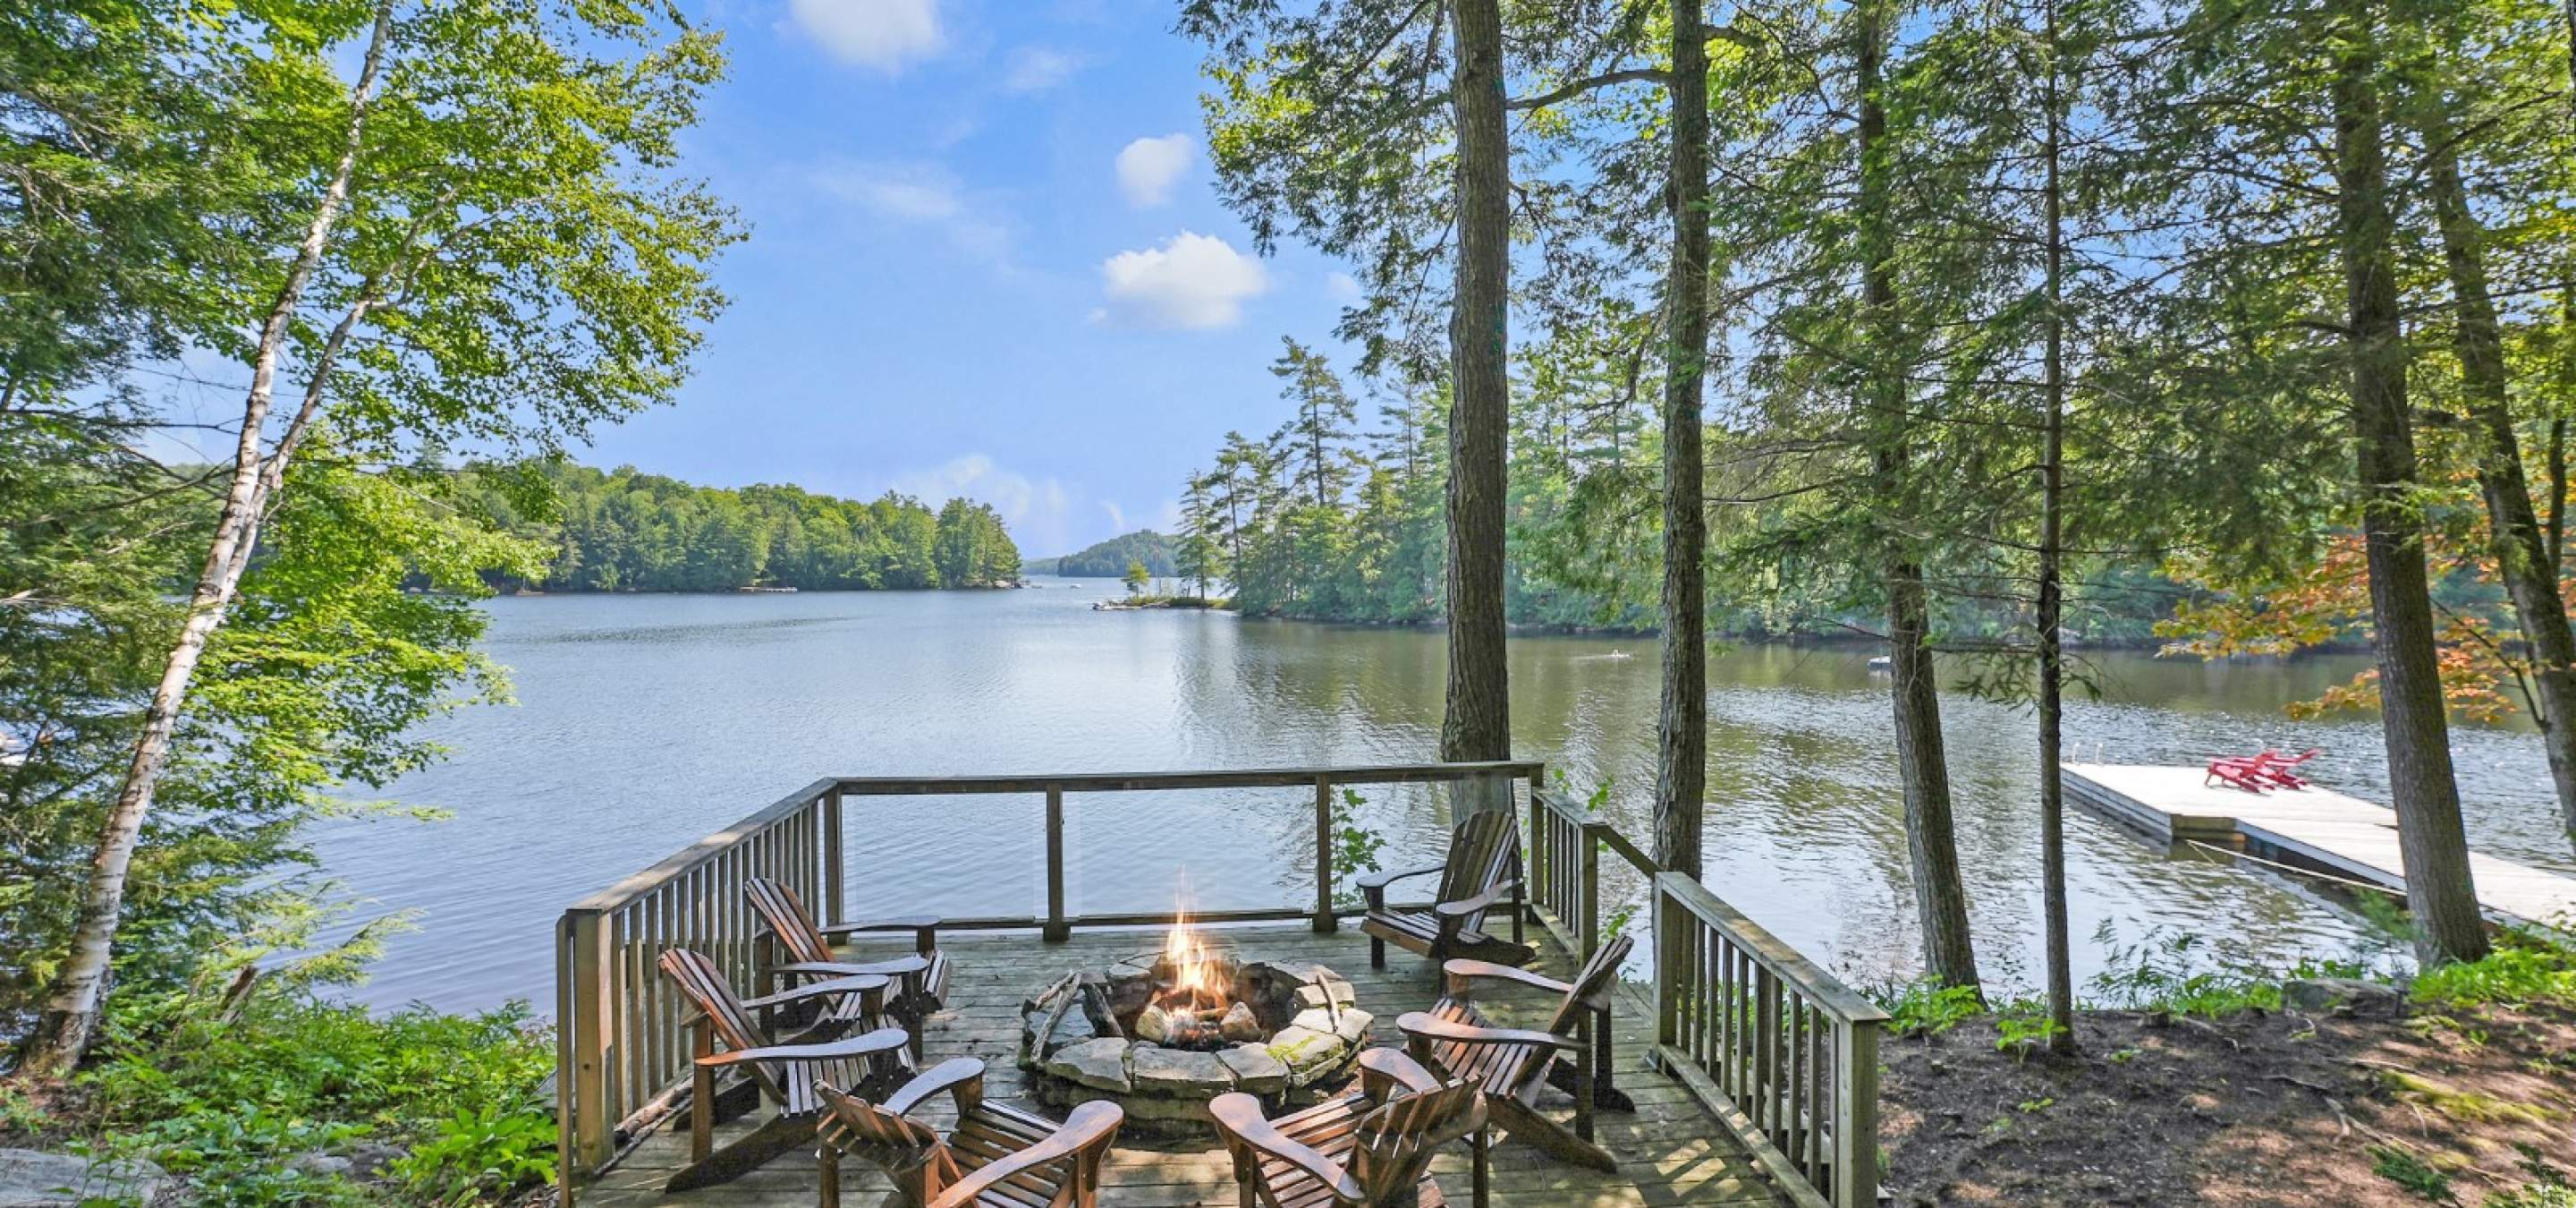 Fire pit with 6 chairs around it and a glass railing overloooking a lake. Trees surround and a dock in the water with red chairs.